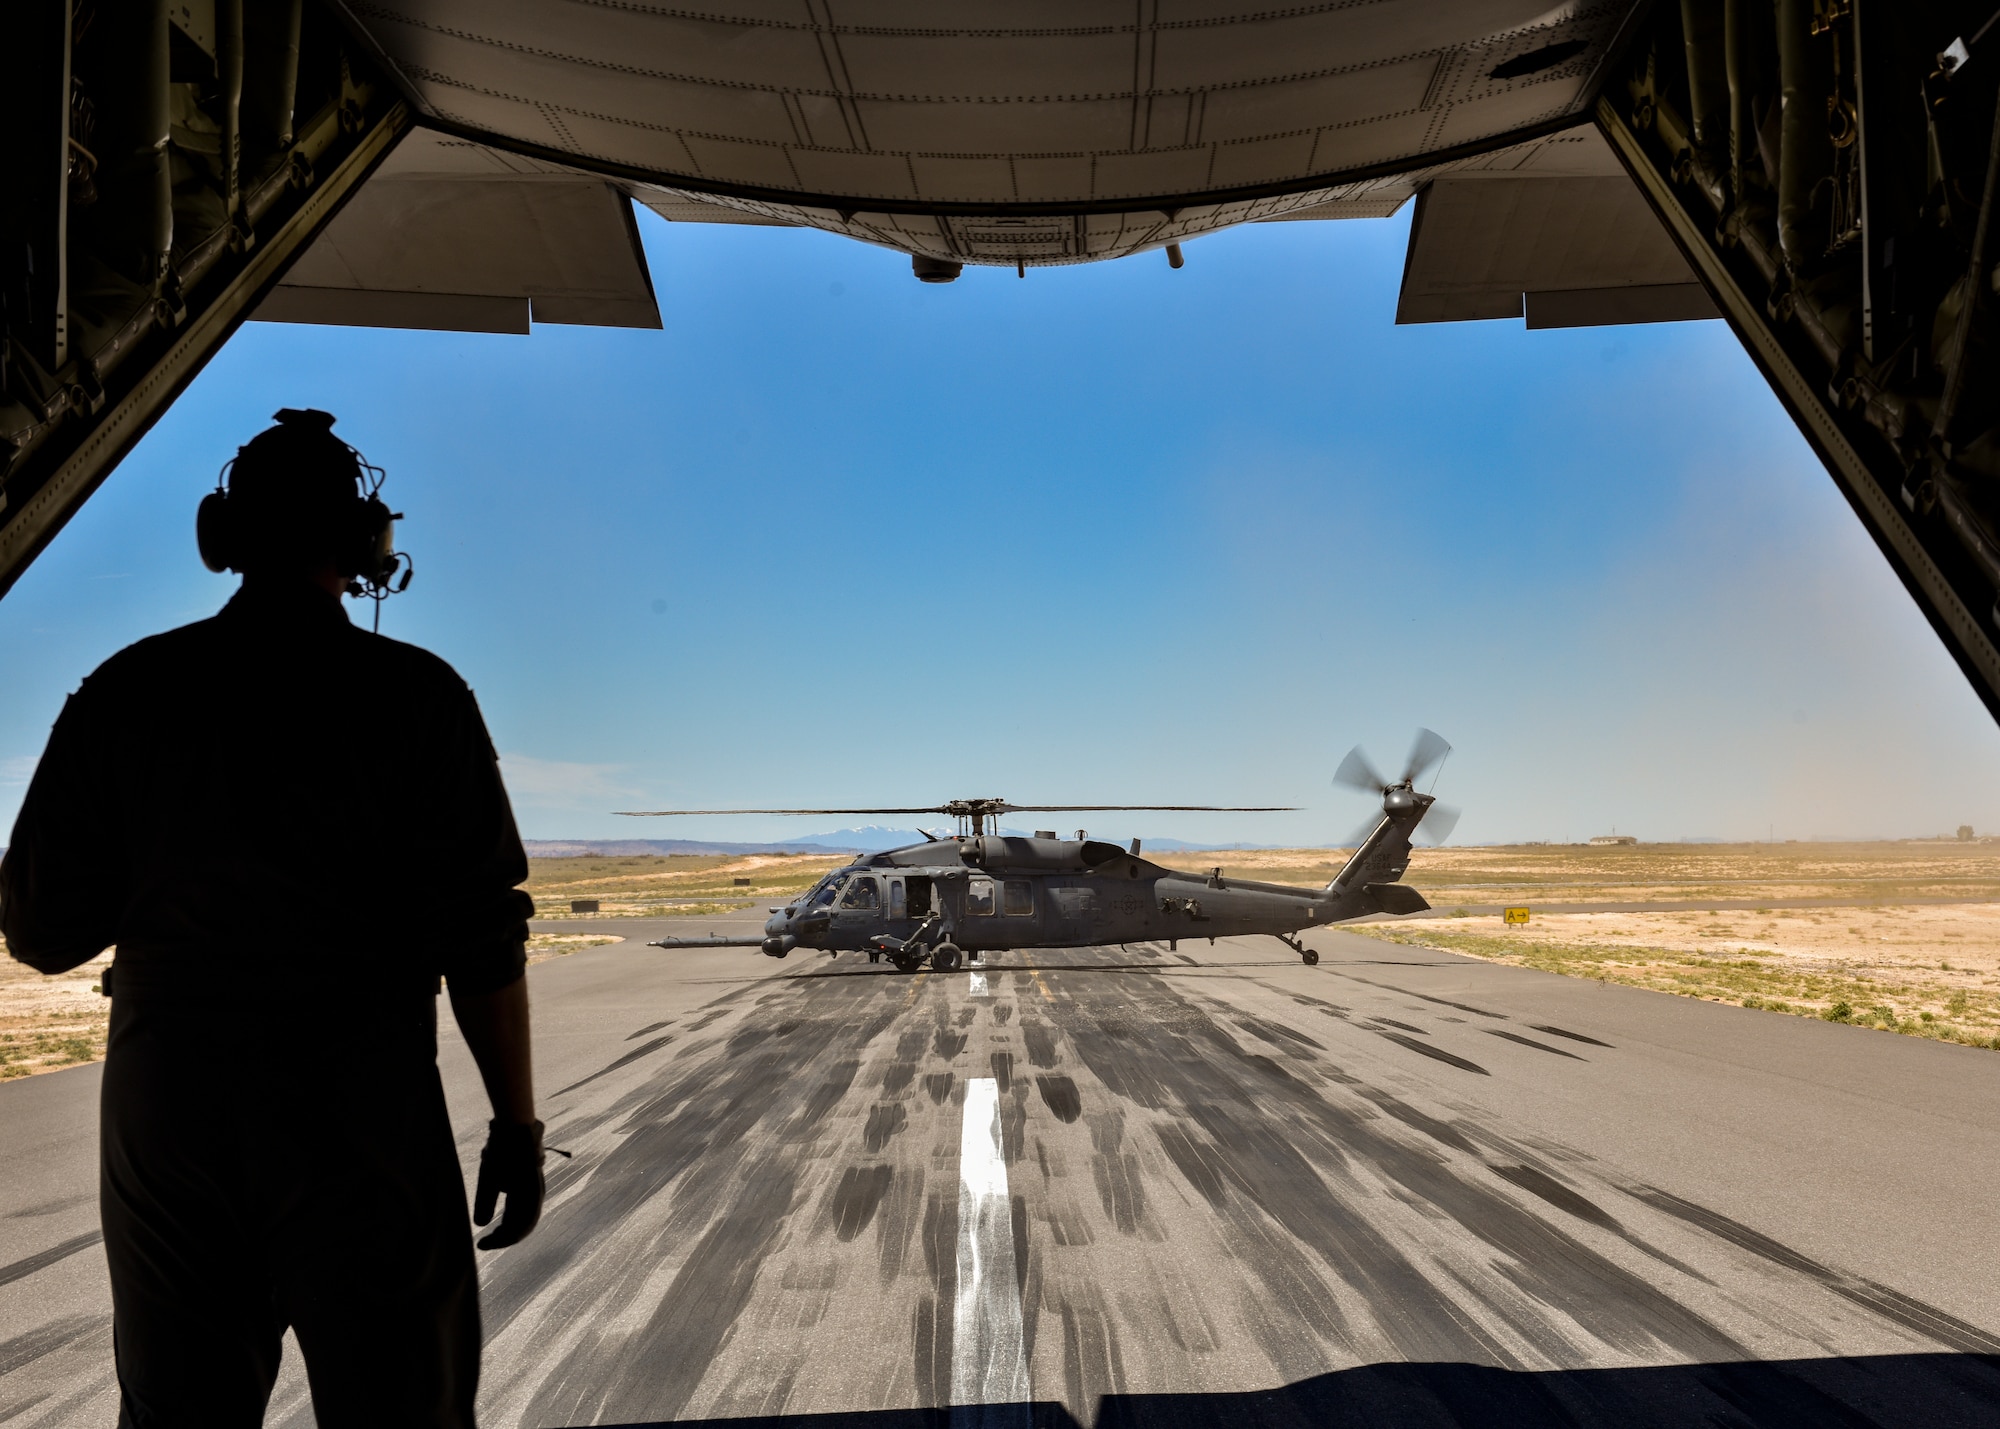 A loadmaster assigned to the 415th Special Operations Squadron, Kirtland Air Force Base, N.M., watches an HH-60G PAVE Hawk during a training mission at Belen Alexander Airport (Belen, N.M.), April 19, 2019. The Mission of the 512th RQS is to provide mission ready UH-1N Huey and HH-60G Pave Hawk crewmembers to Air Force Special Operations and Air Force Global Strike Command units world-wide. (U.S. Air Force photo by Airman 1st Class Austin J. Prisbrey)